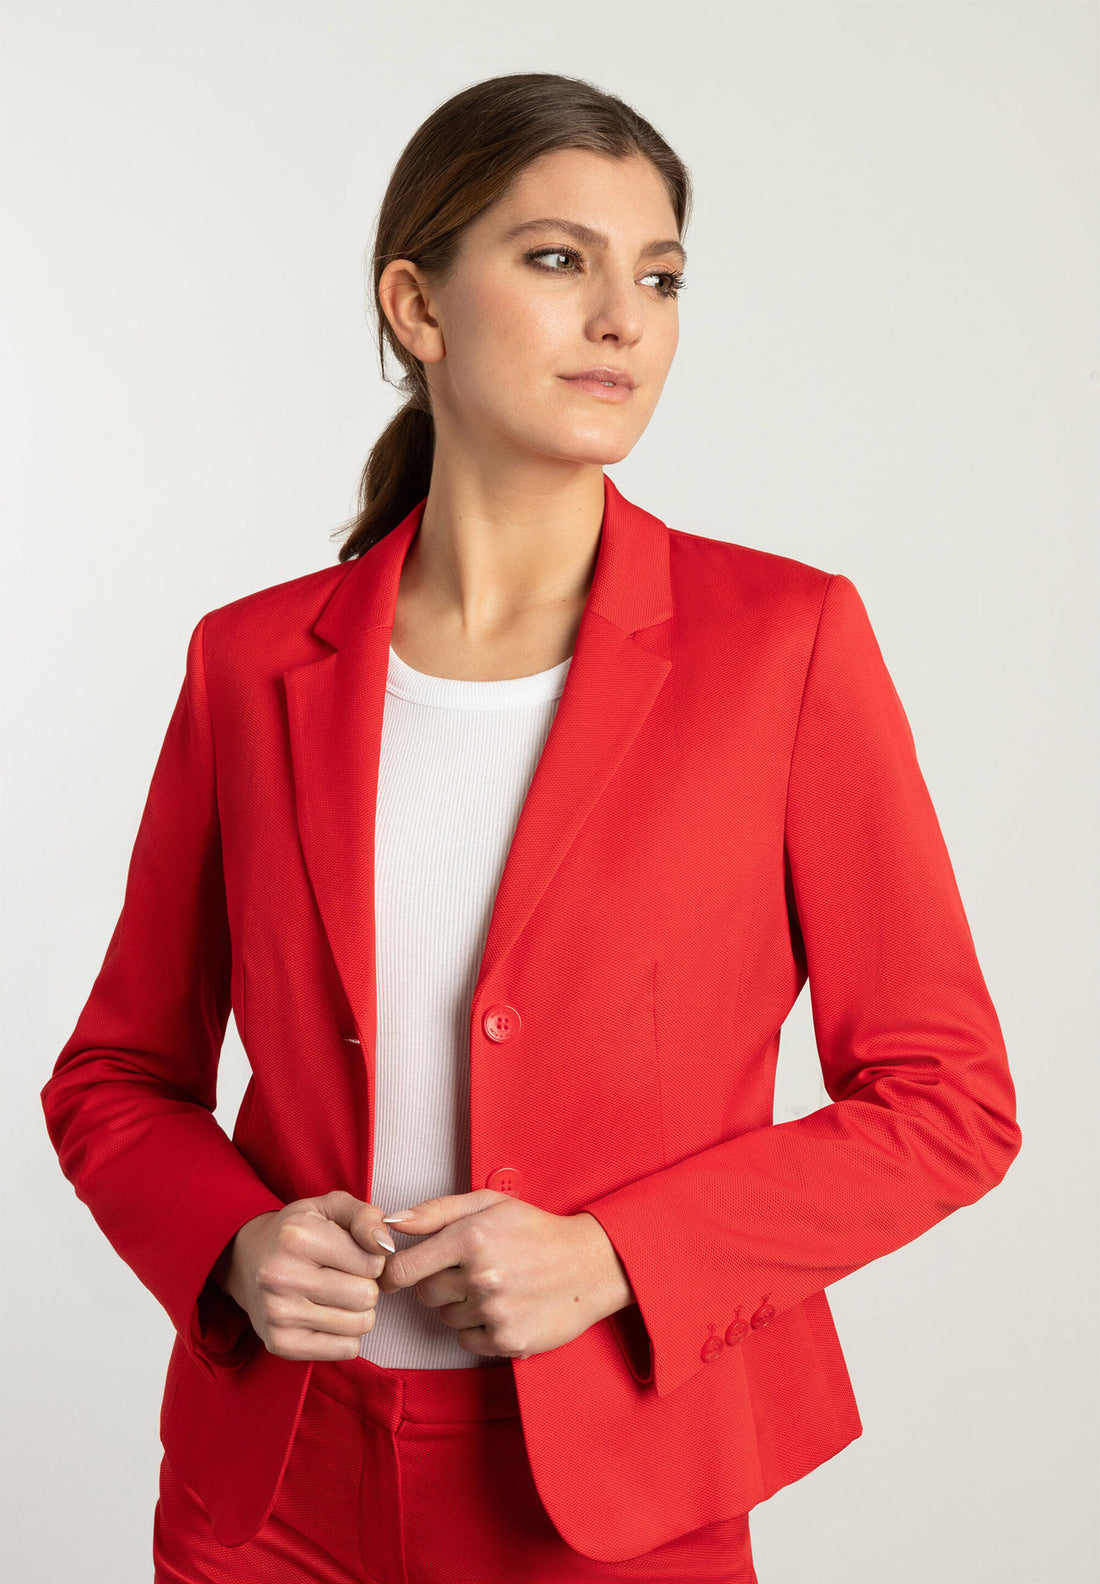 Red Blazer With A Fine Structure_41826576_0537_01